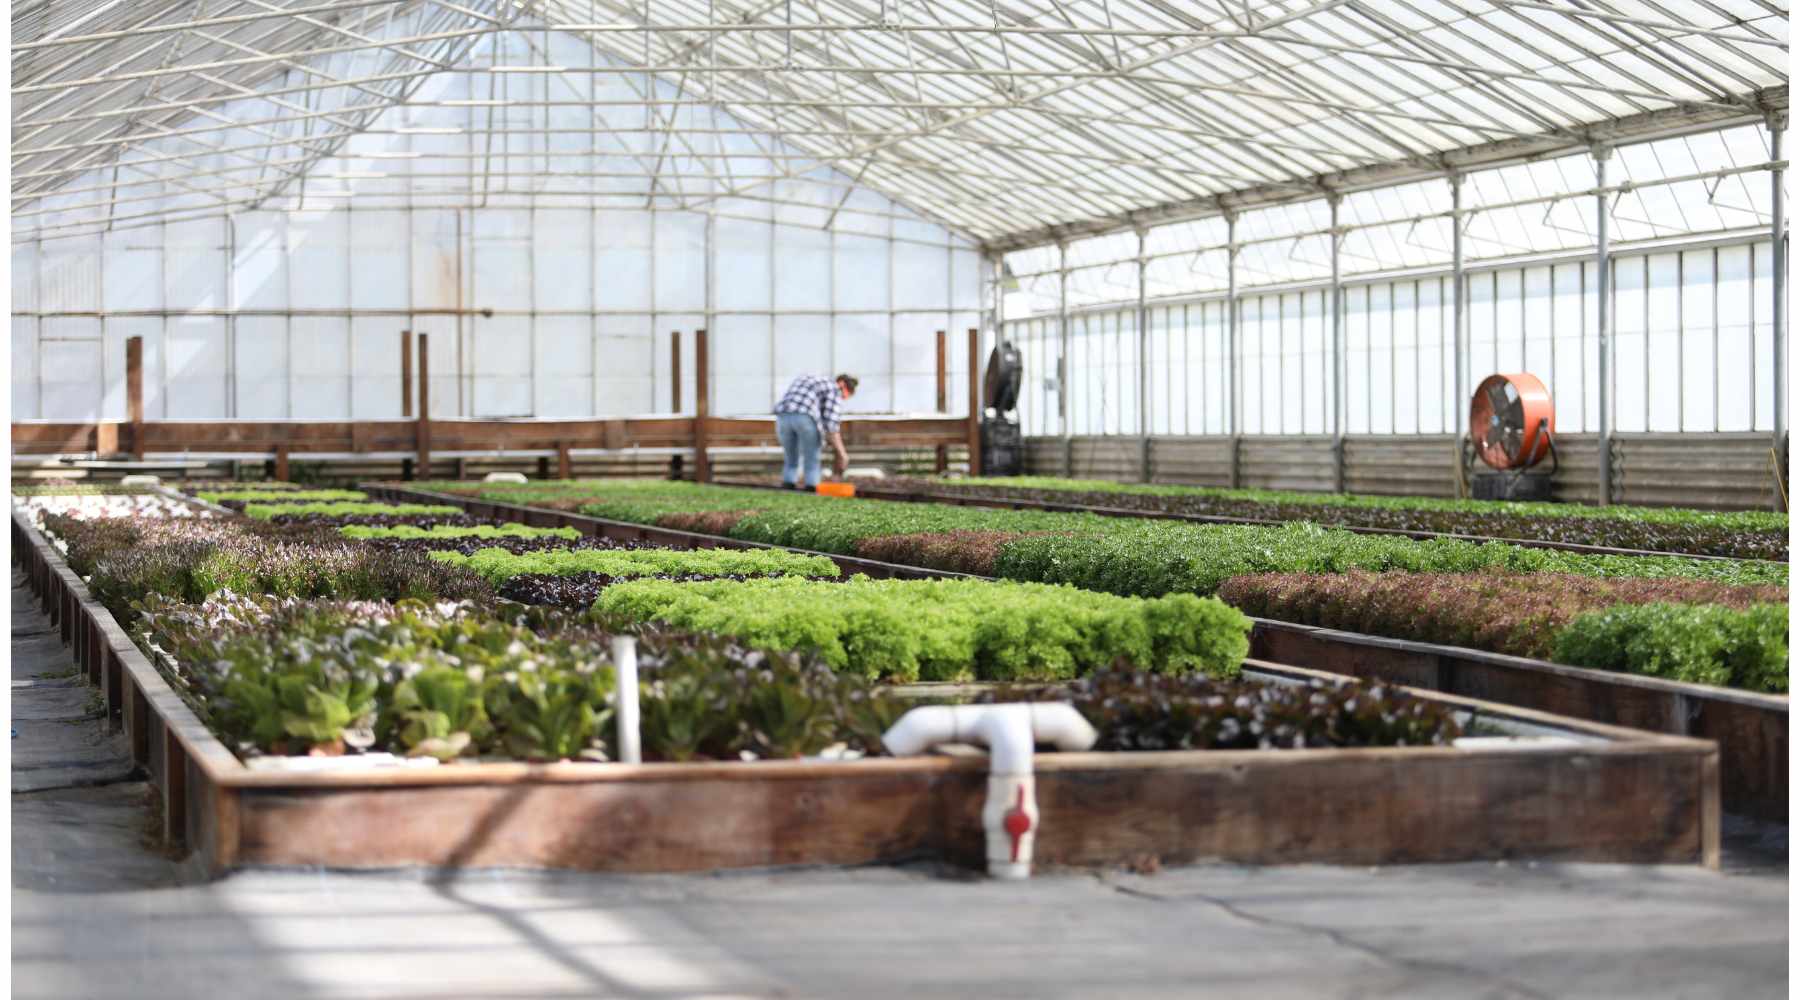 Greenhouse filled with Deep Water Culture Beds Filled with Lettuce